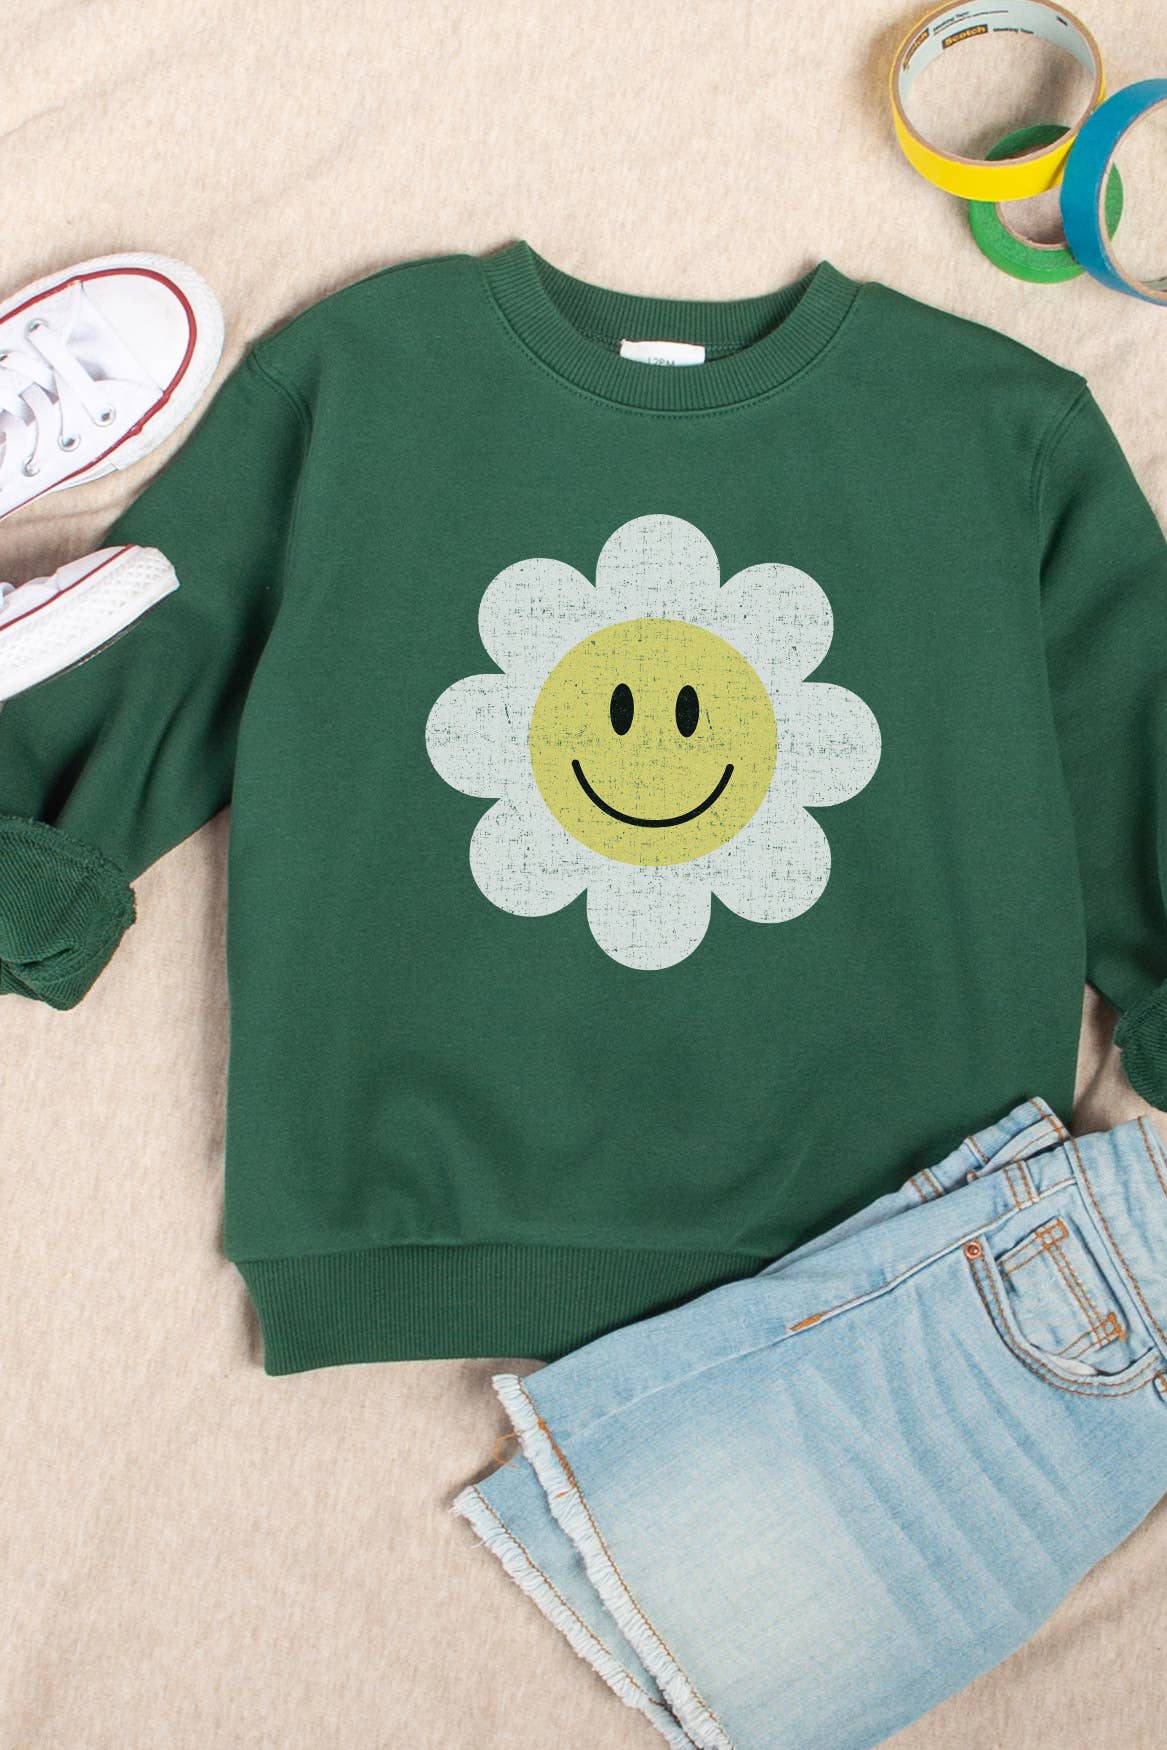 GIRLS SMILE DAISY FACE GRAPHIC SWEATSHIRTS Spring-Summer ppeppi